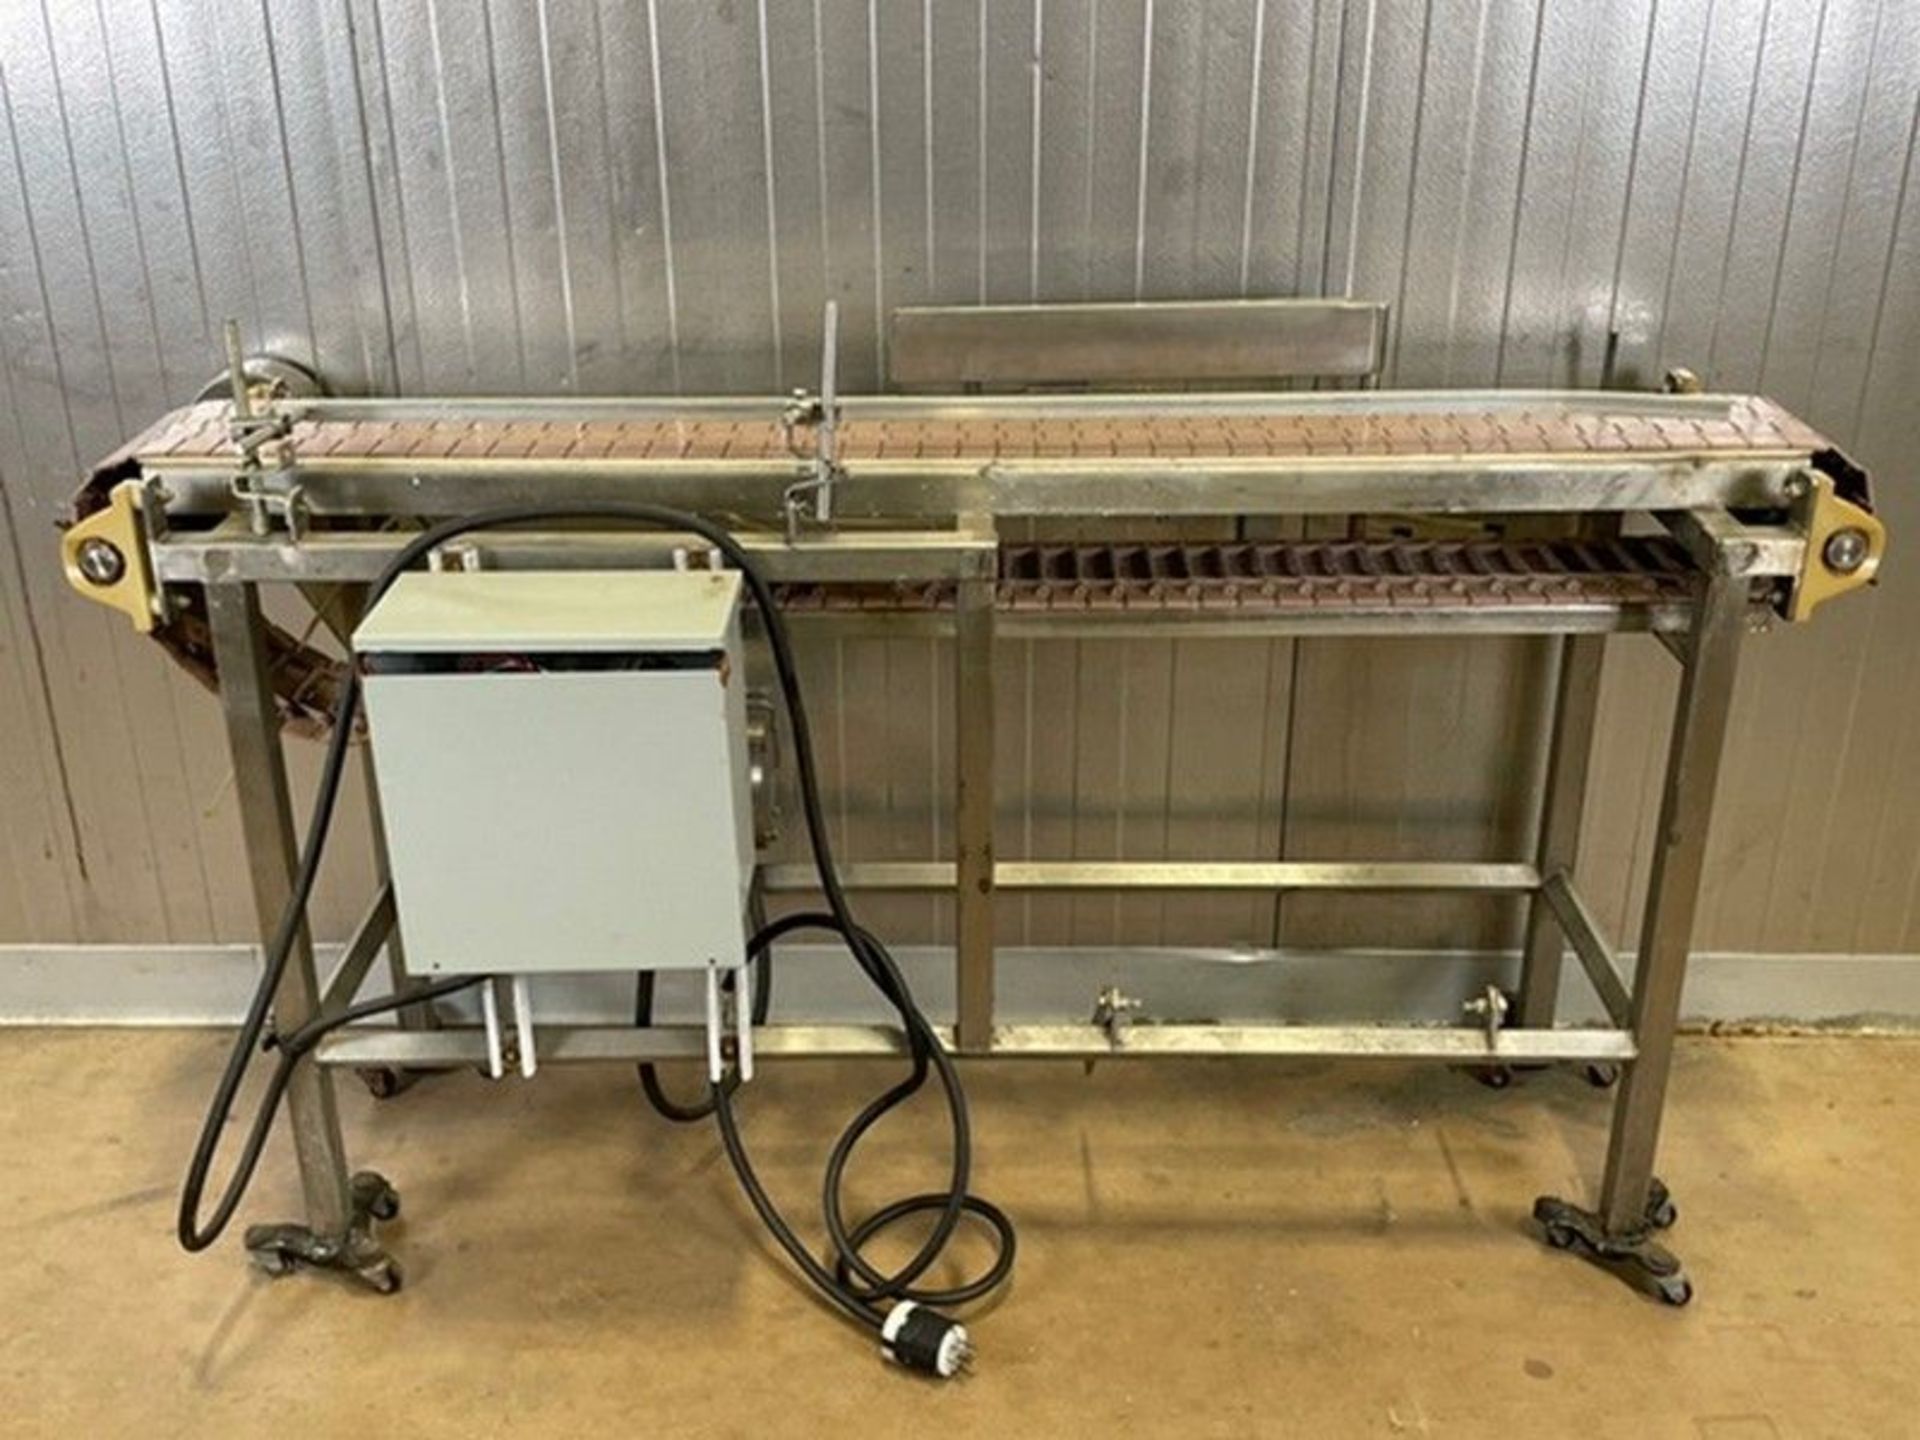 Straight Section 10" S/S Product Conveyor, Mounted on S/S Frame (Auction ID 80f02d30) (Handling, - Image 3 of 5